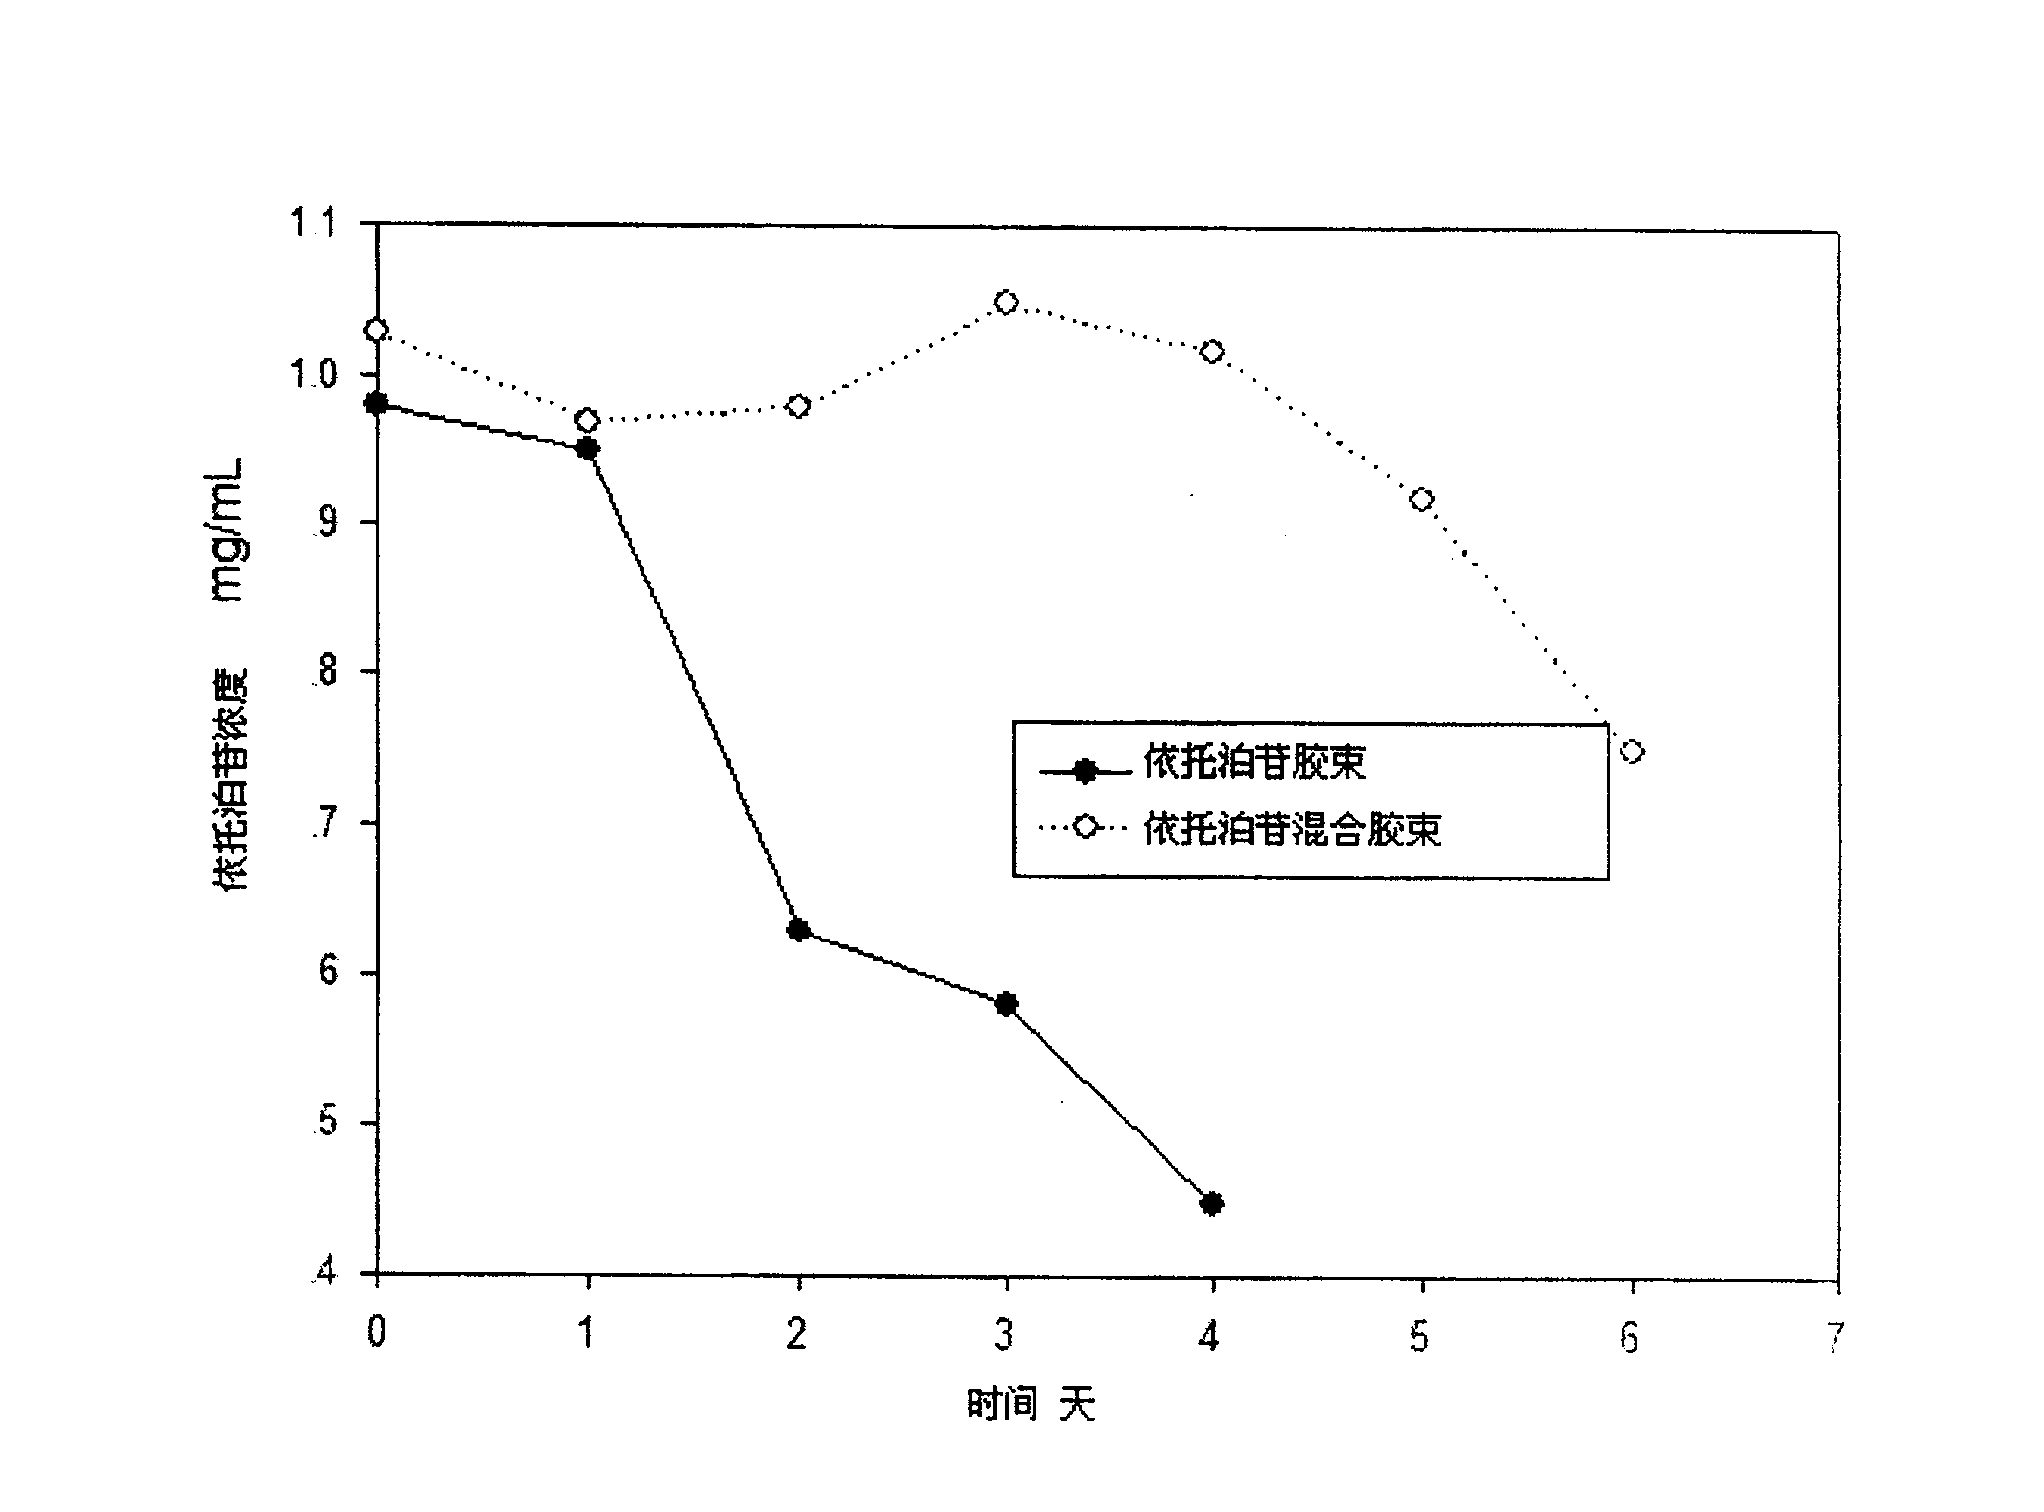 Stable polymer micelle medicine carrging system